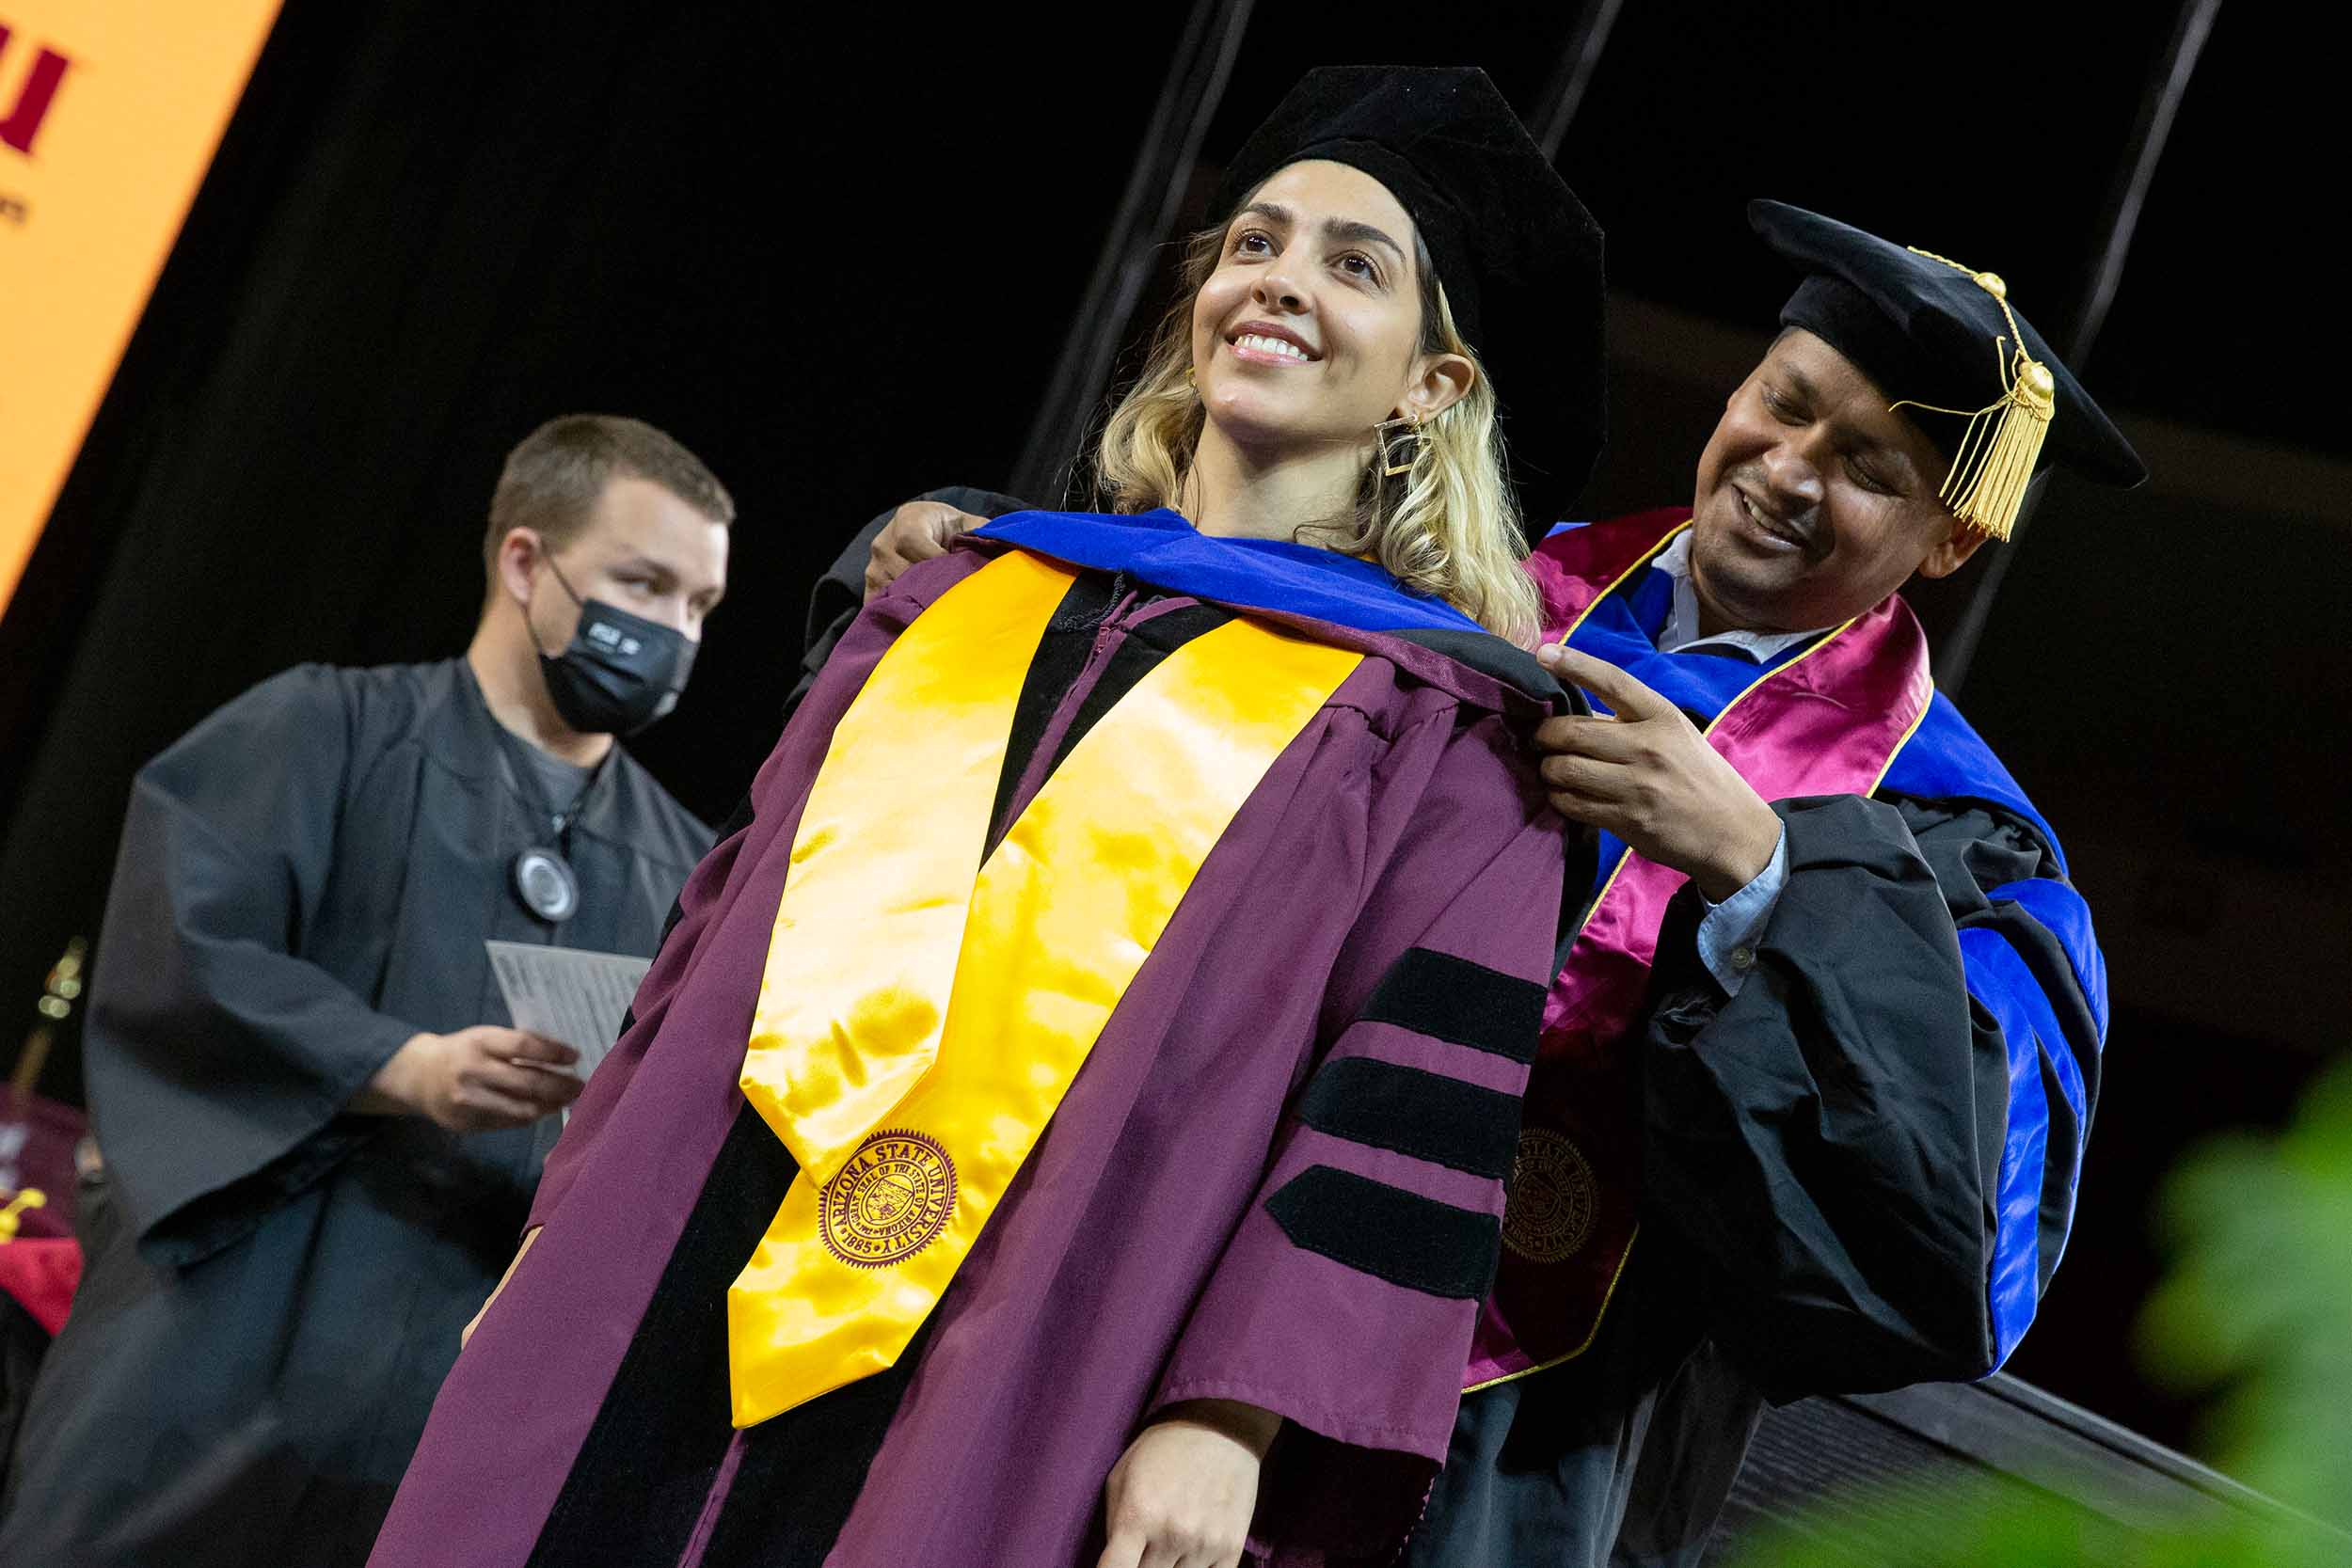 An ASU PhD graduate is hooded by her academic mentor at the Fall 2021 ASU Engineering Convocation ceremony